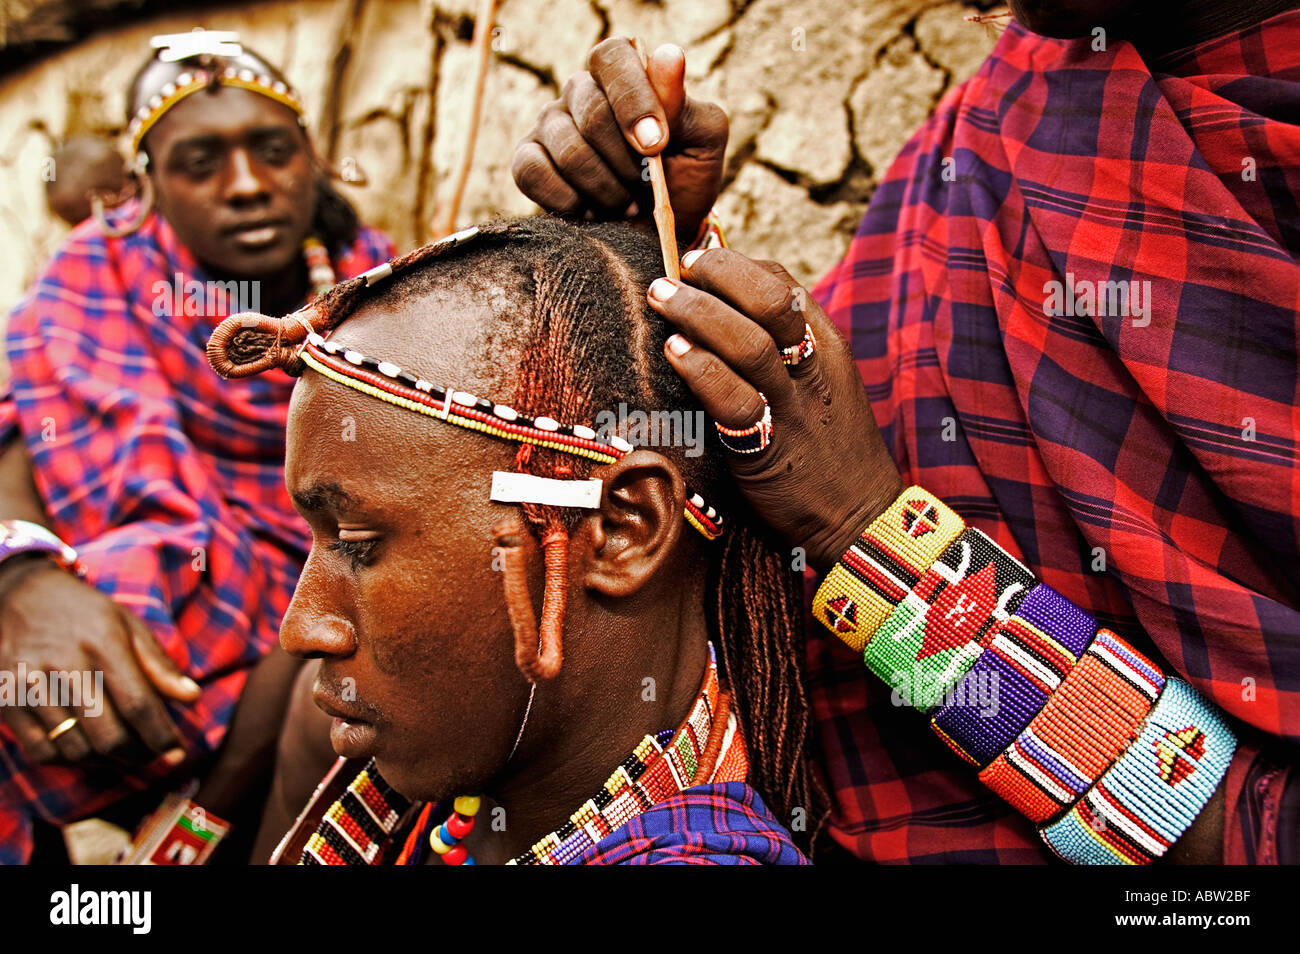 Maasai Men spend hours braiding each others long ochred colored hair Model released Kenya Stock Photo